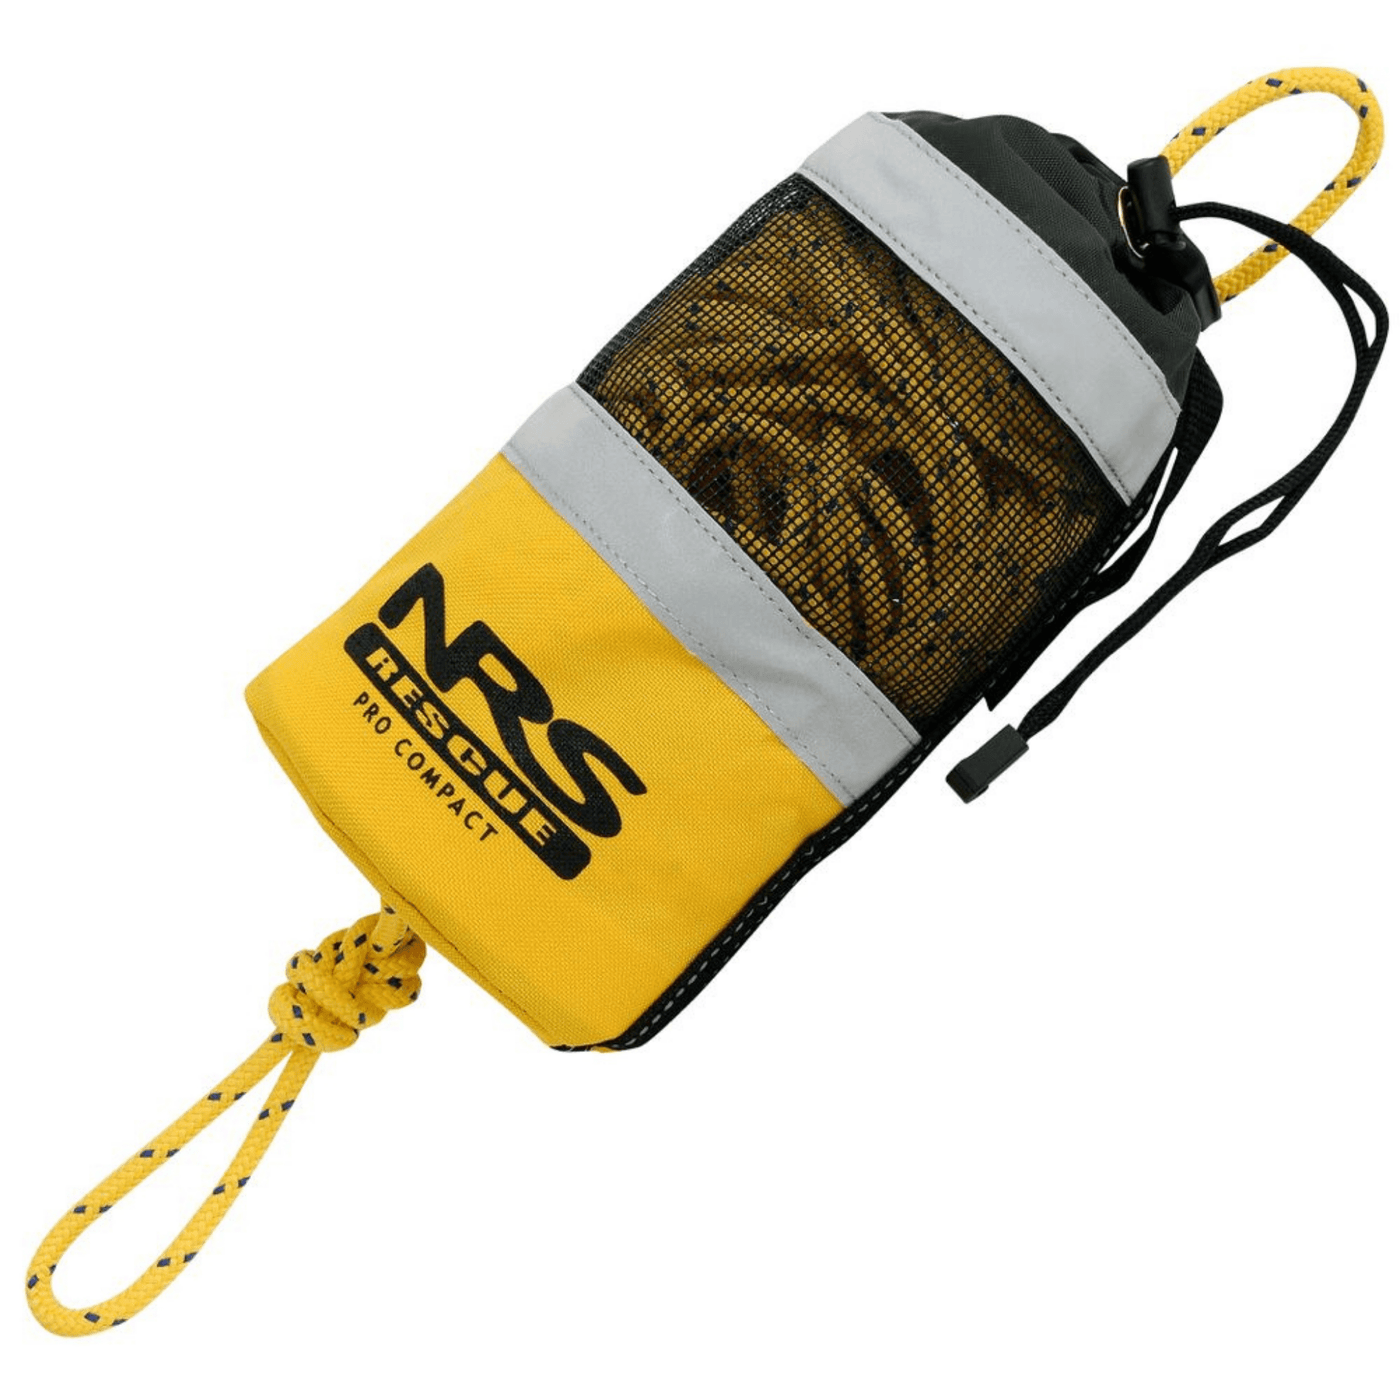 NRS Pro Compact Rescue Throw Bag - 21M | Kayak Safety Throw bag | Further Faster Christchurch NZ